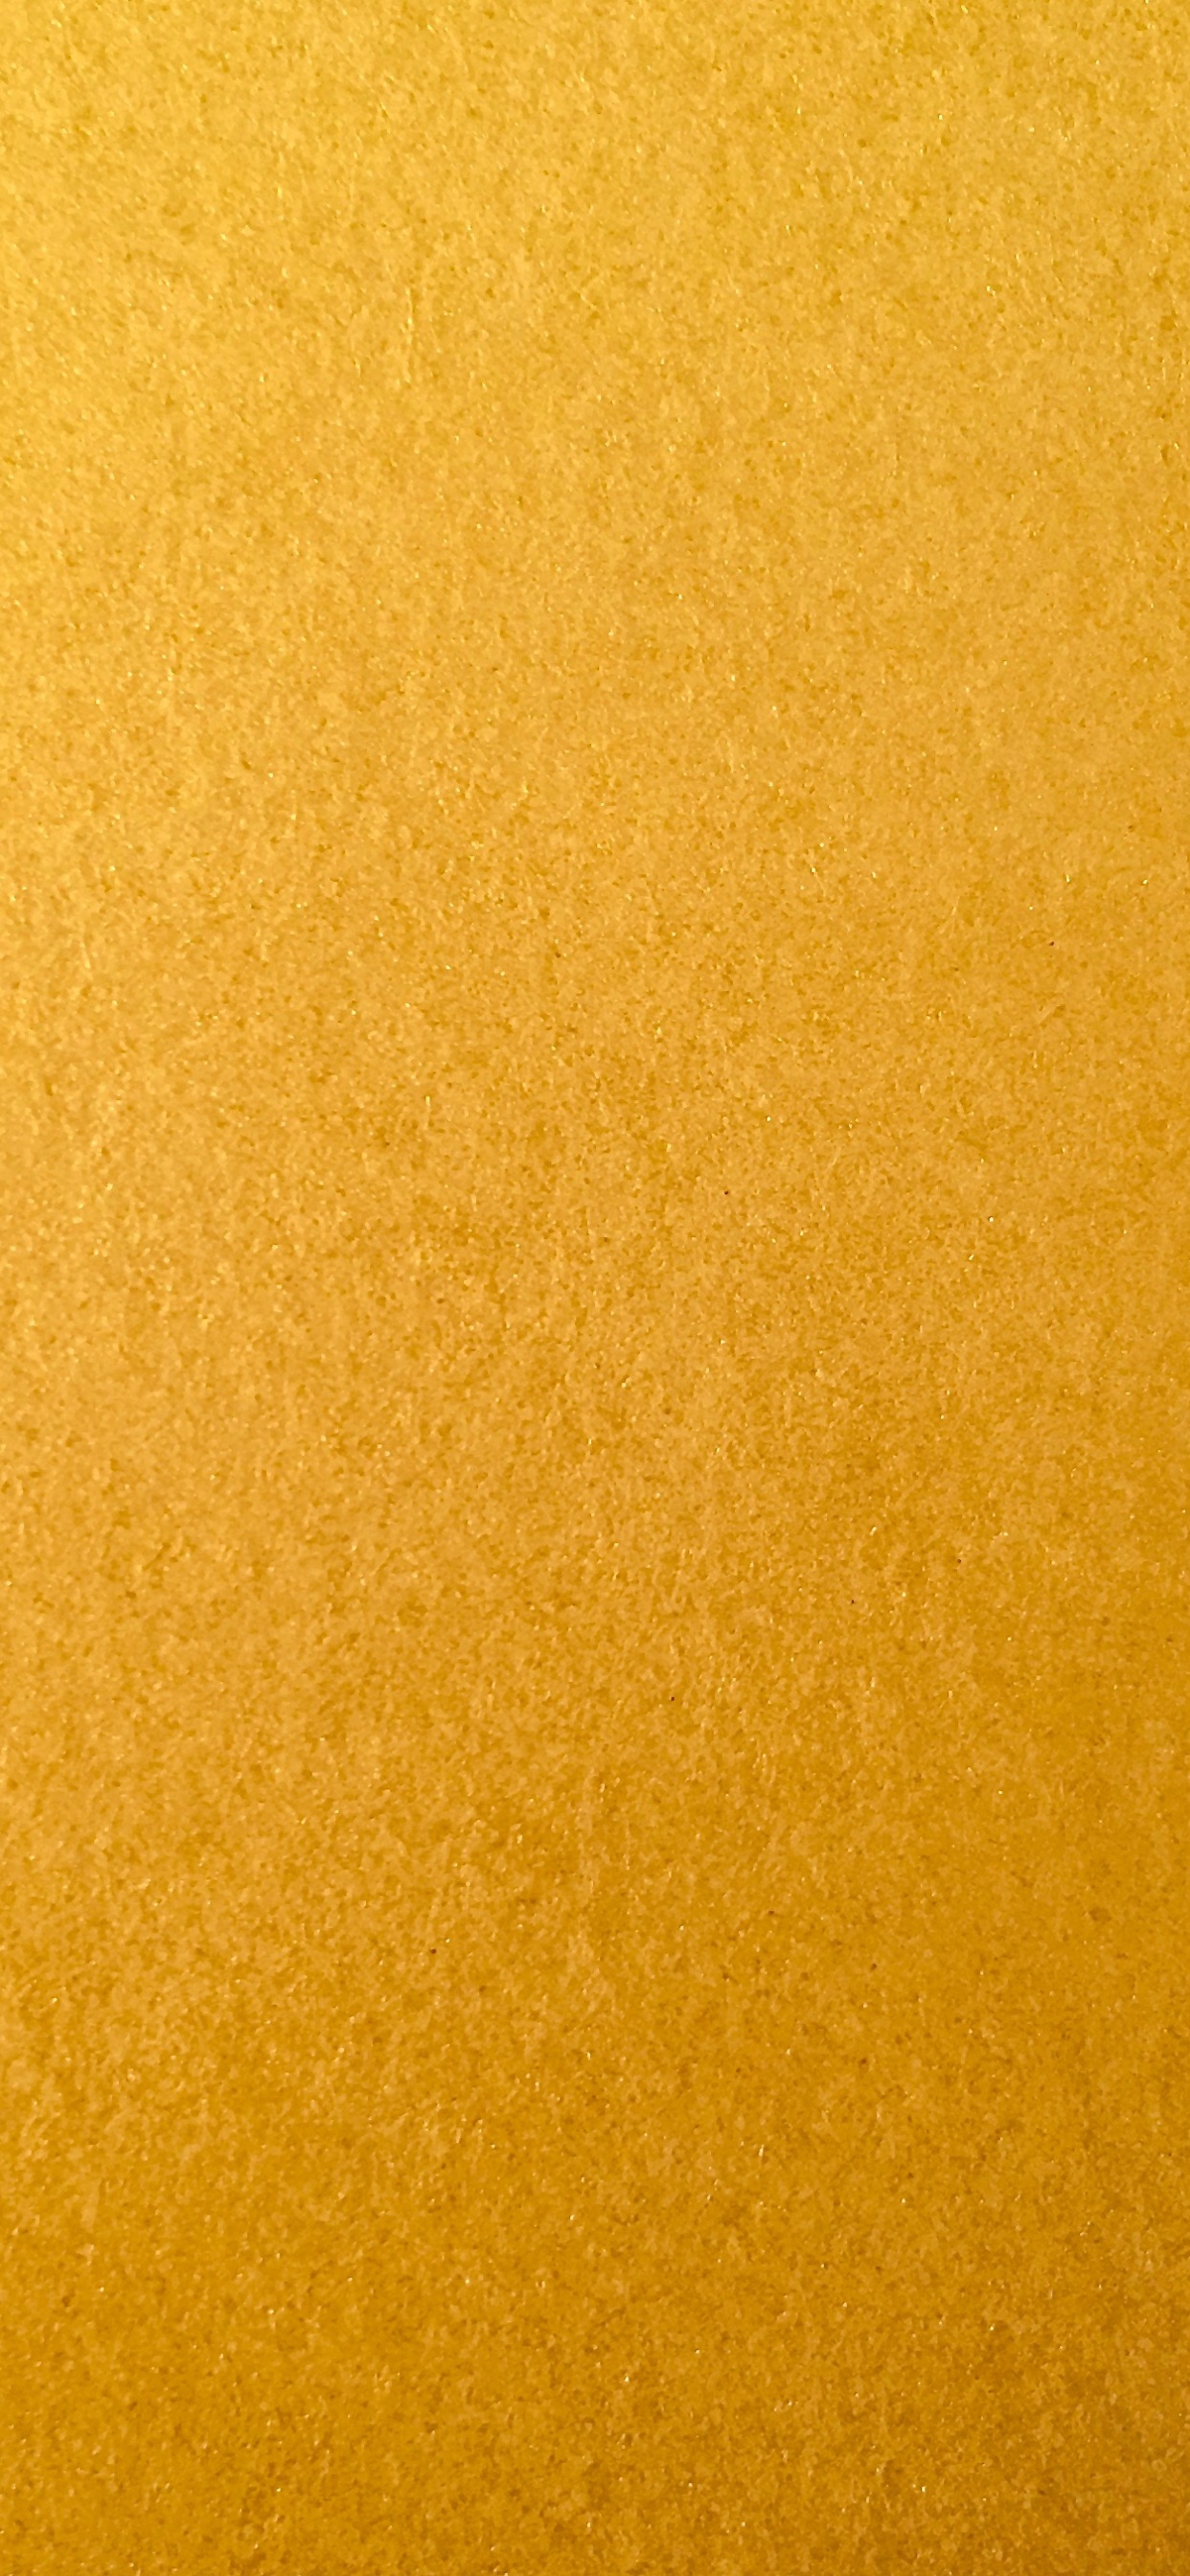 Yellow Textile in Close up Image. Wallpaper in 1242x2688 Resolution